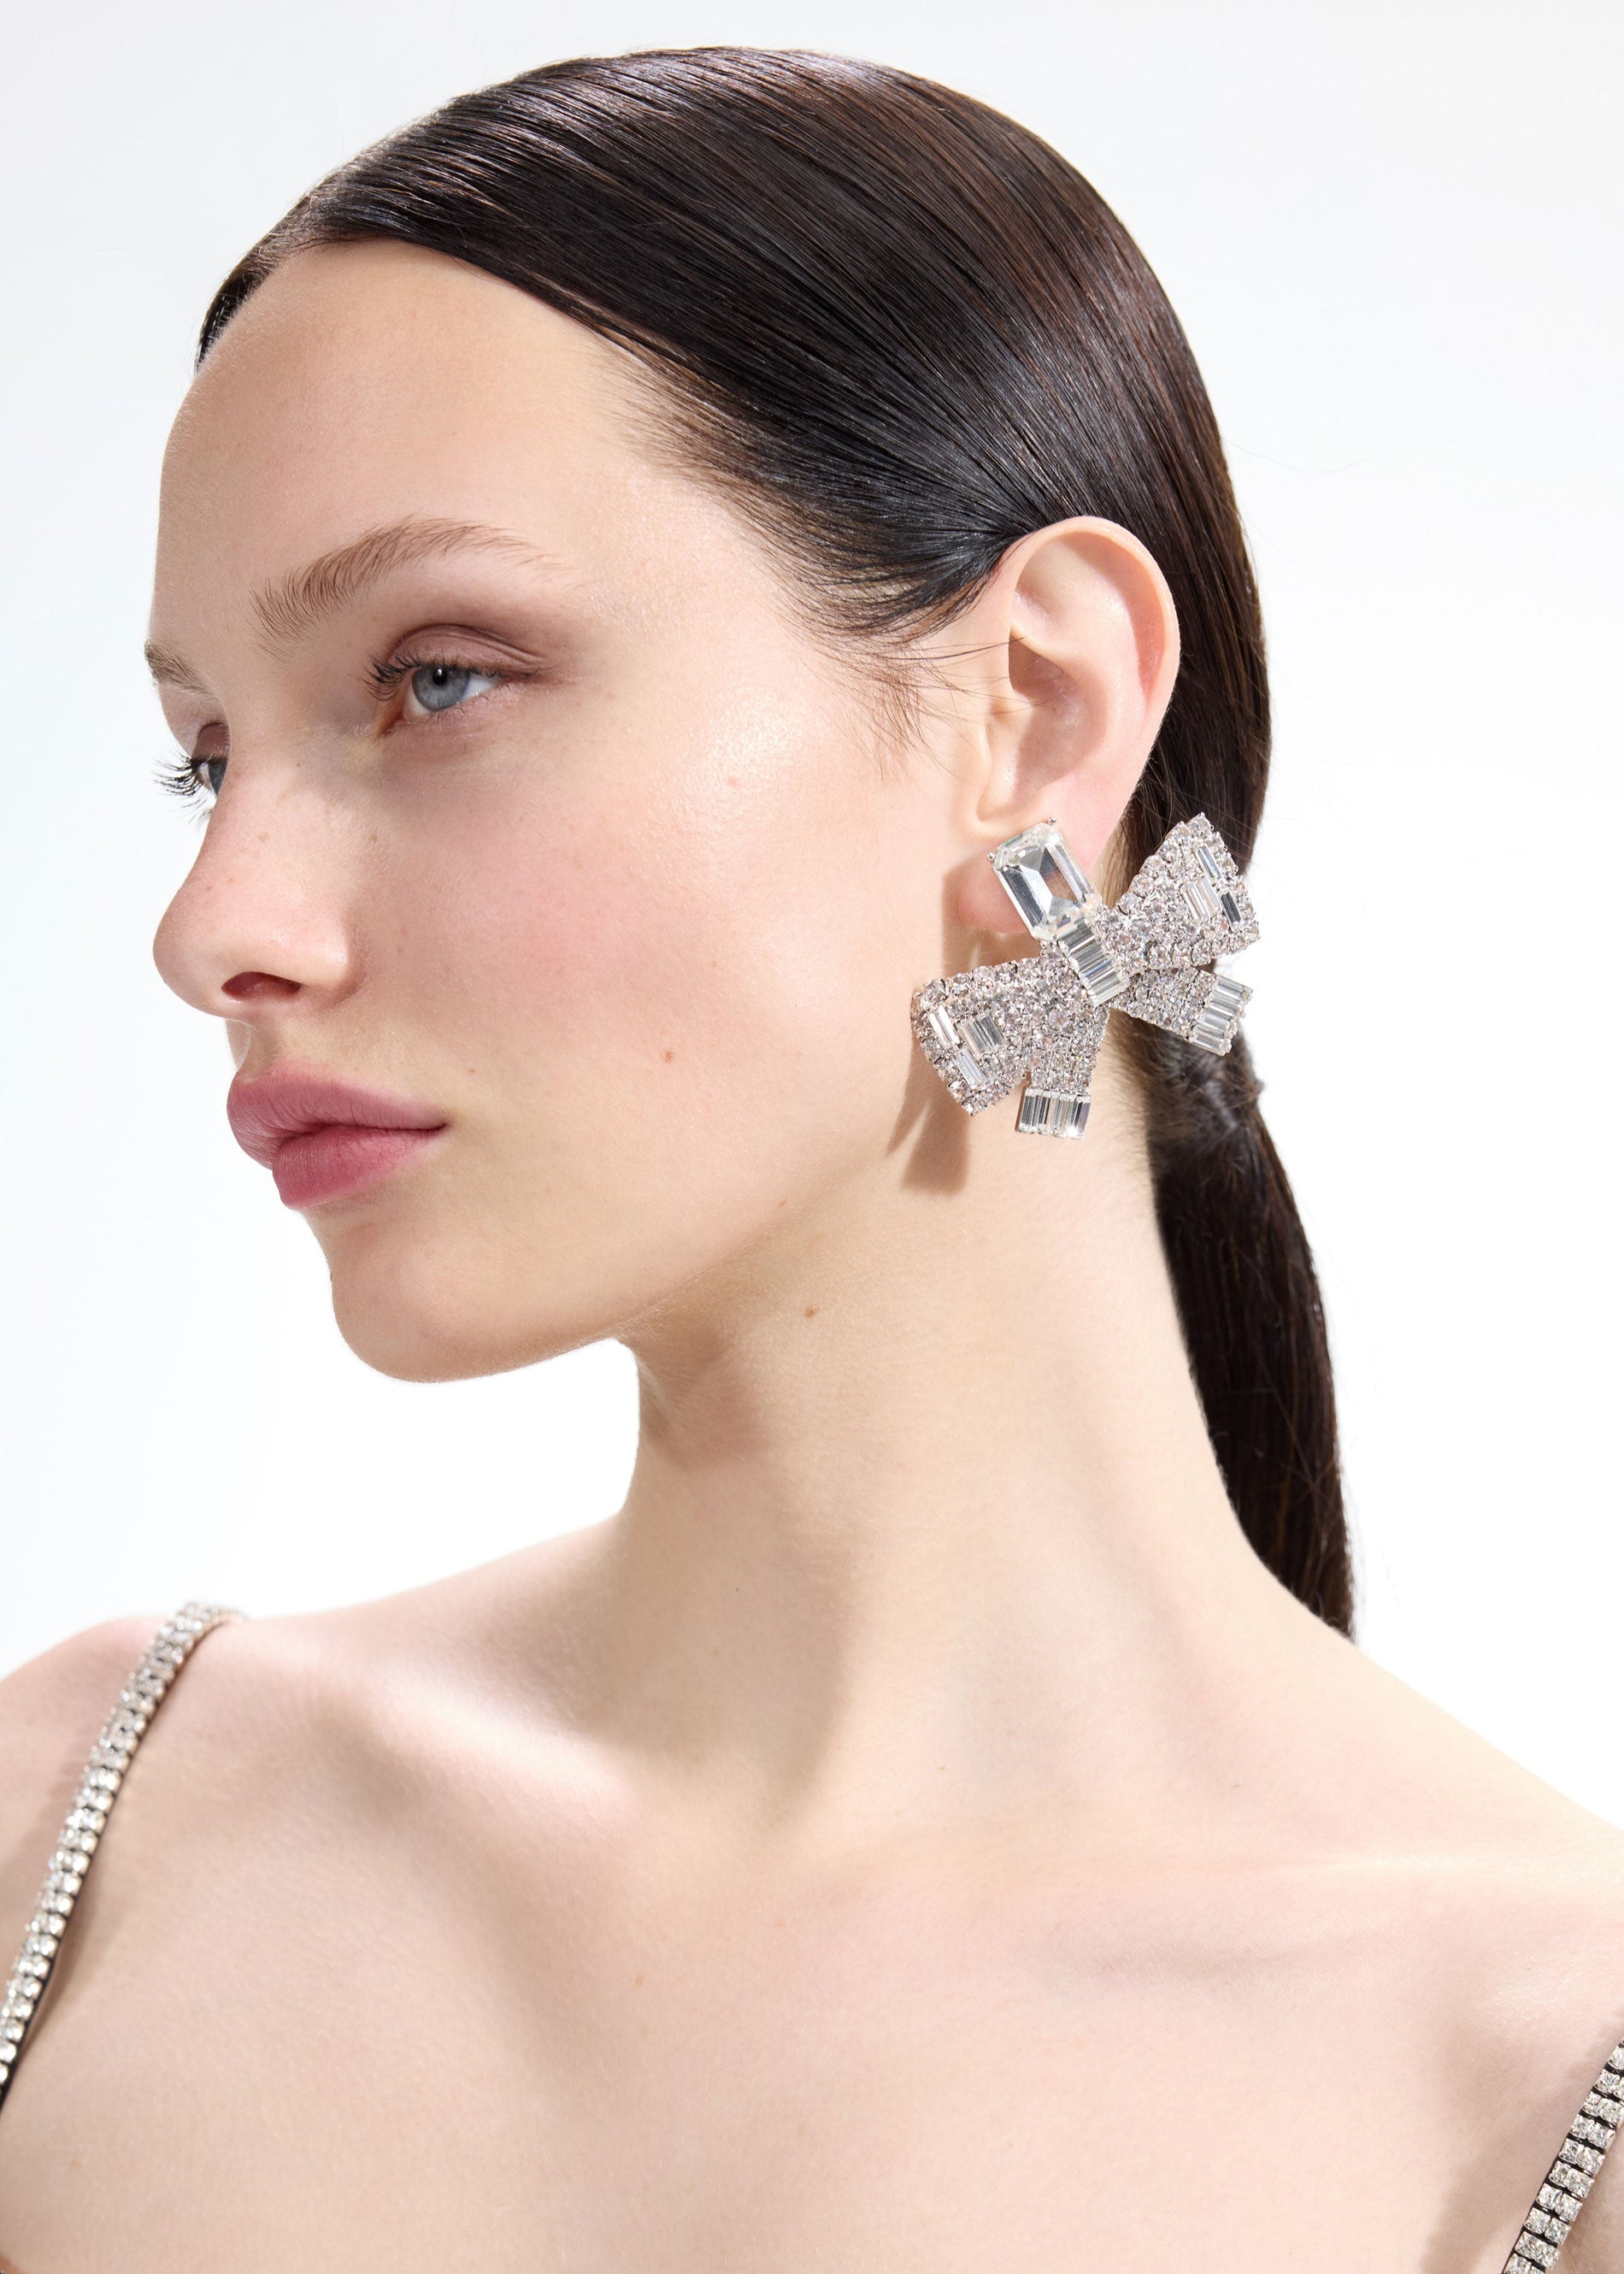 Back view of a woman wearing the White Large Crystal Bow Earrings